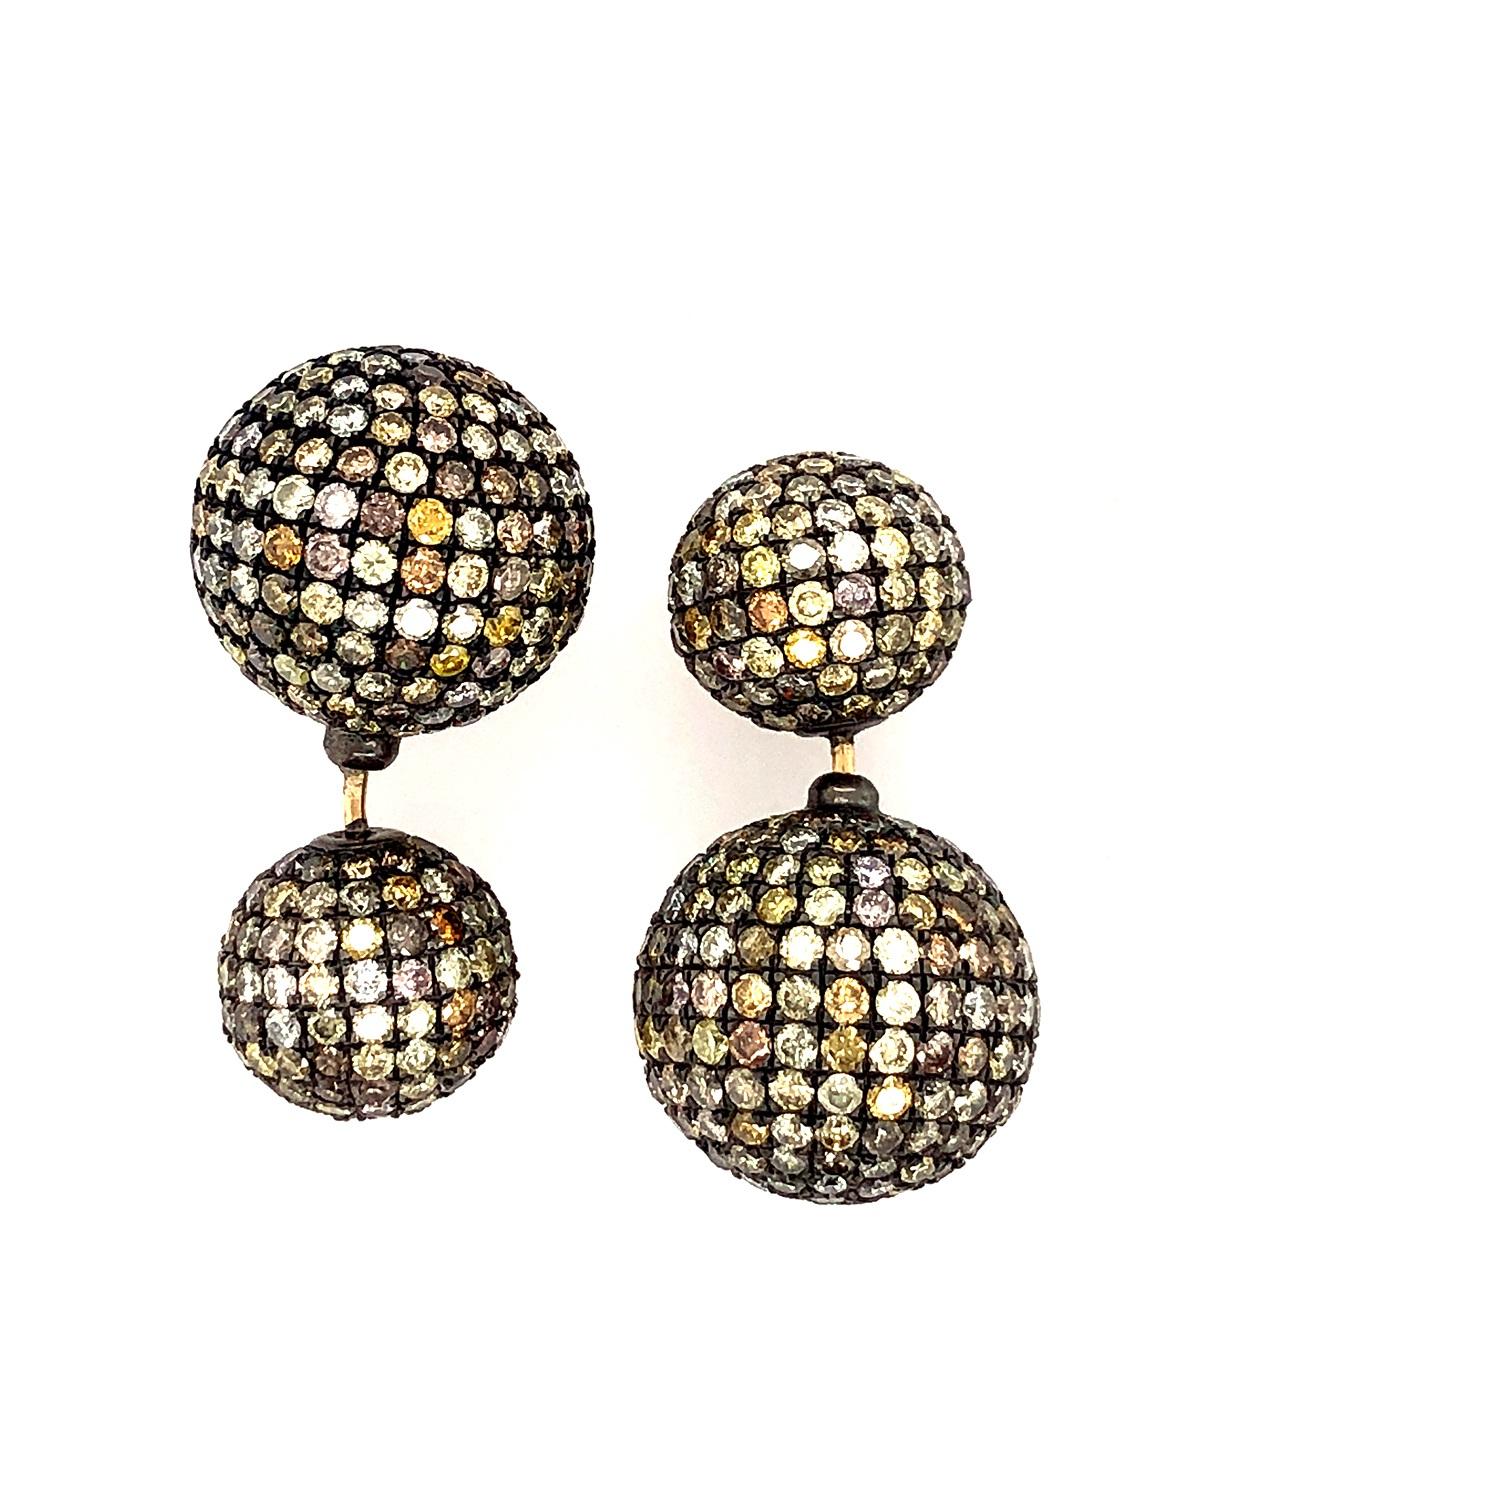 Mixed Cut Pave Fancy Diamond Ball Tunnel Earrings Made in 14k Gold & Silver For Sale